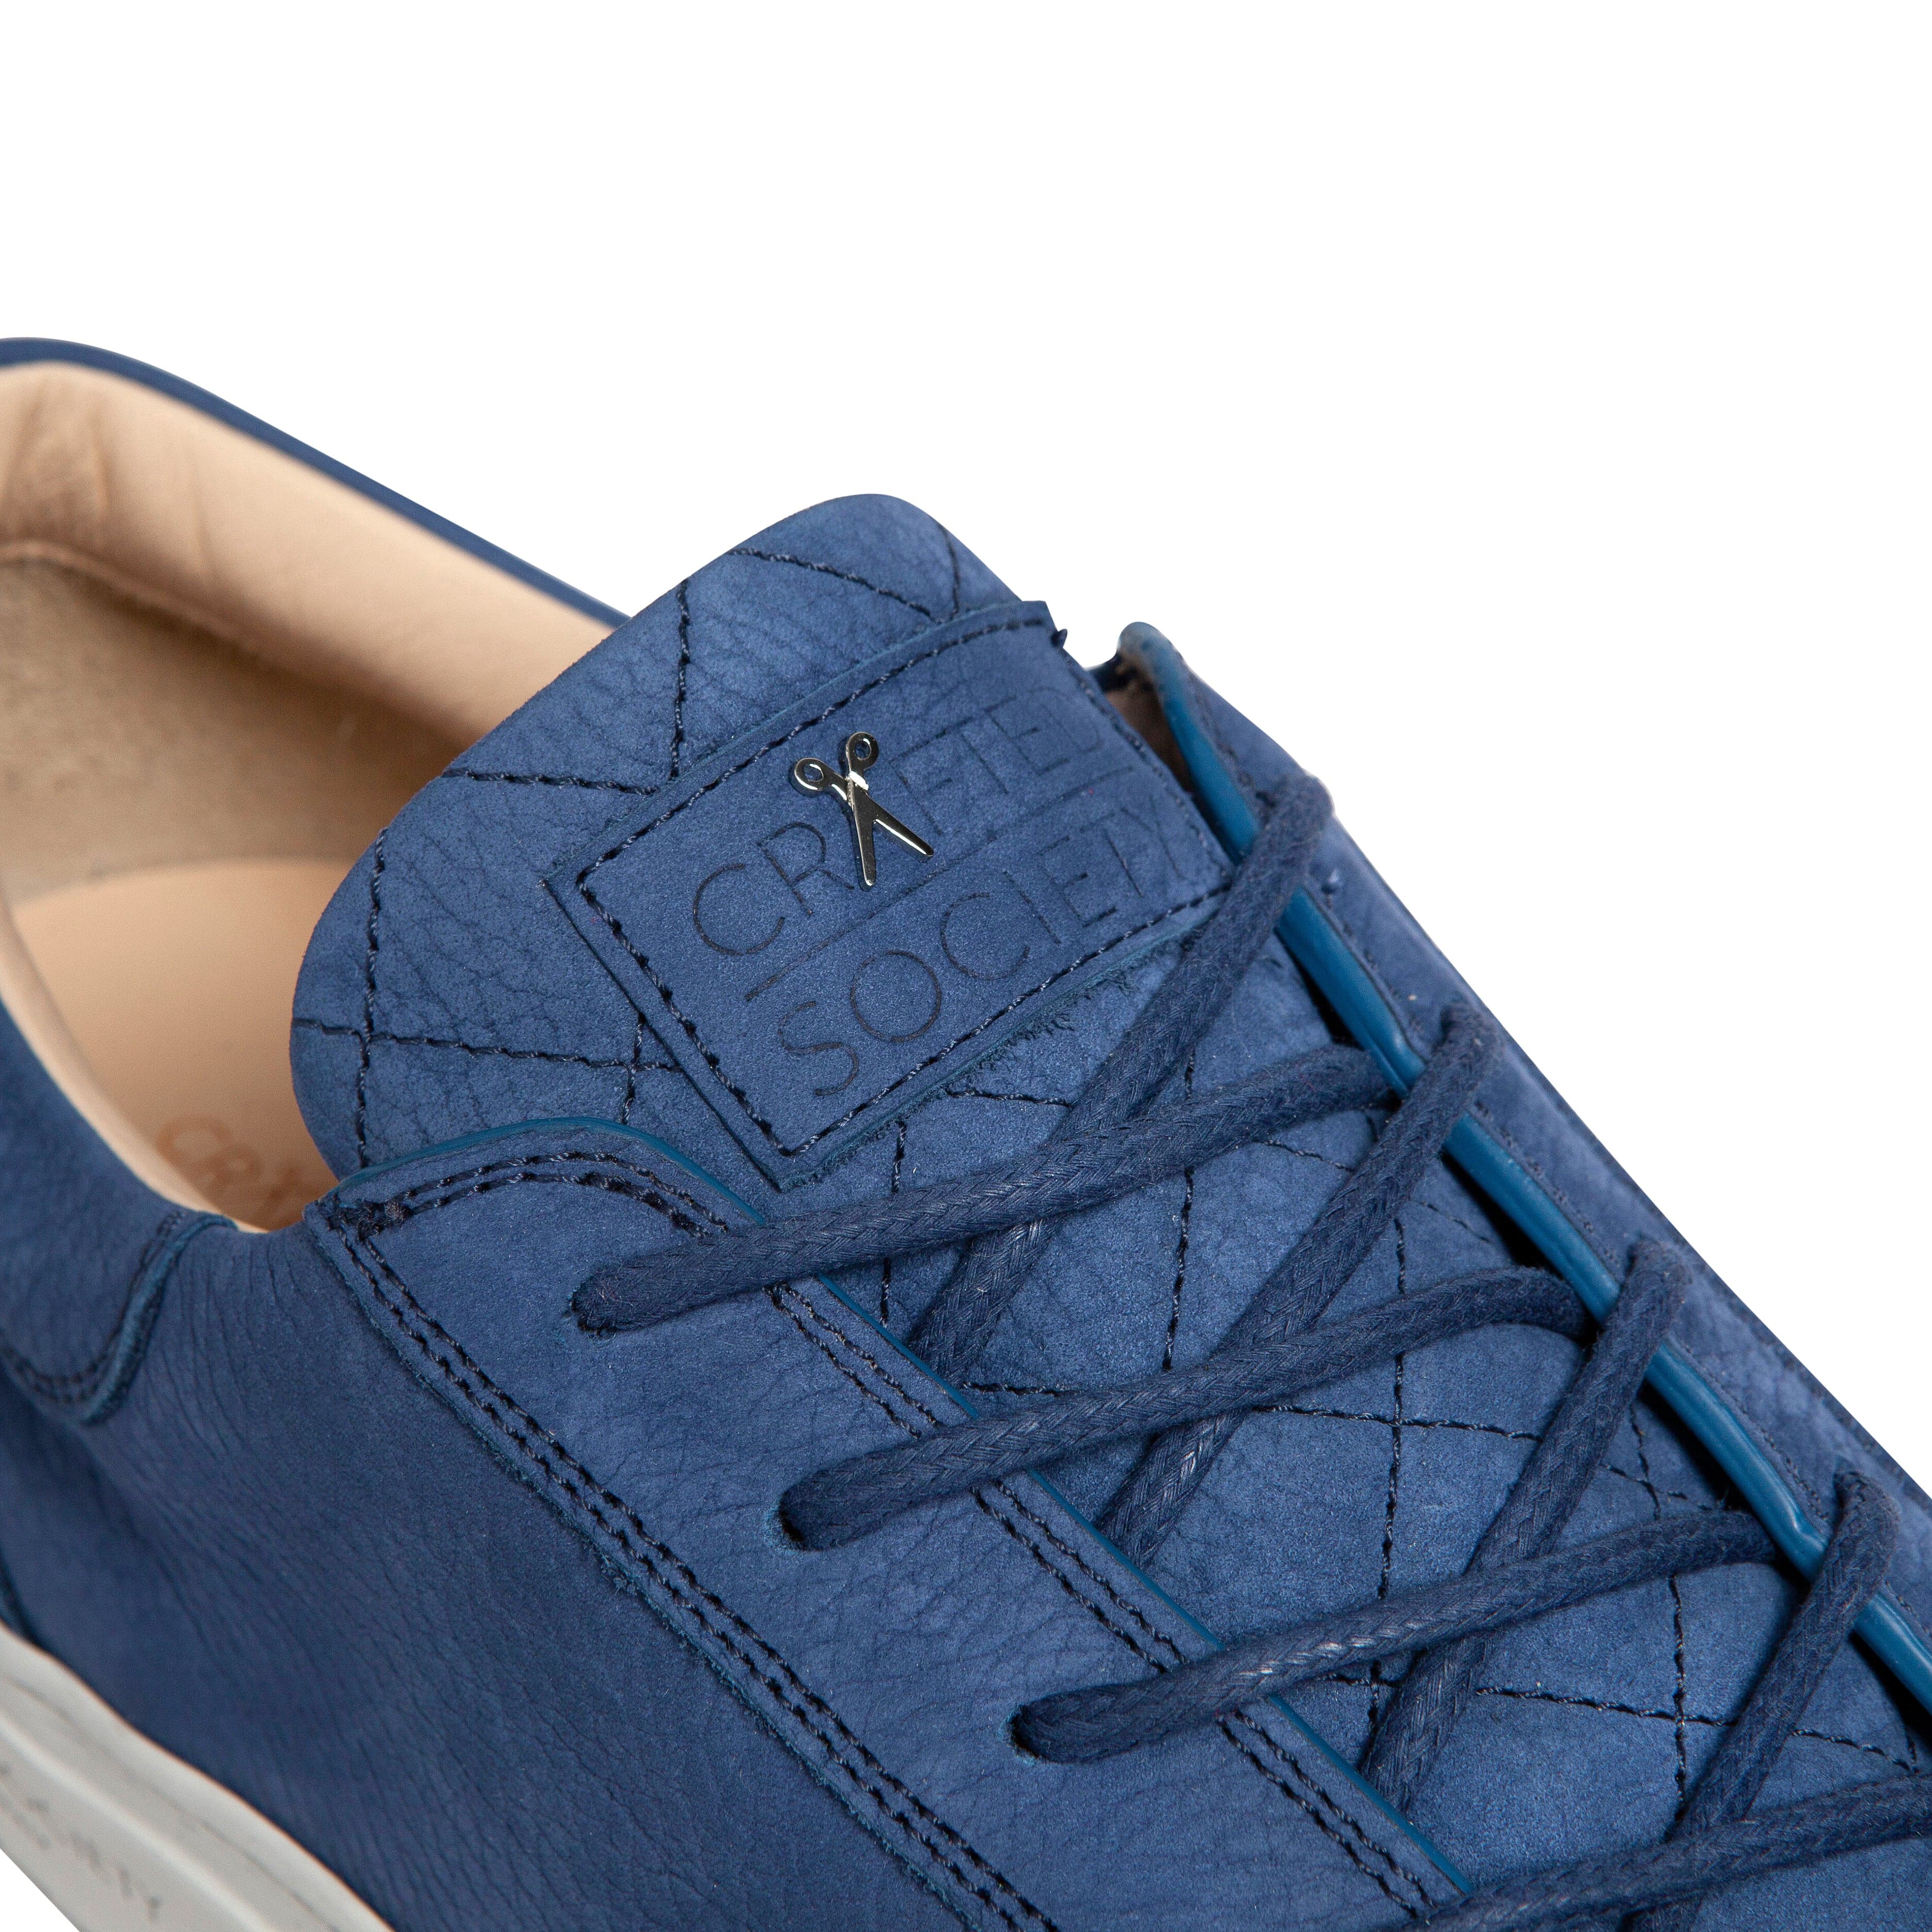 Mario Low Refined Sneaker | Royal Blue Nubuck | White Outsole | Made in Italy | Size 41